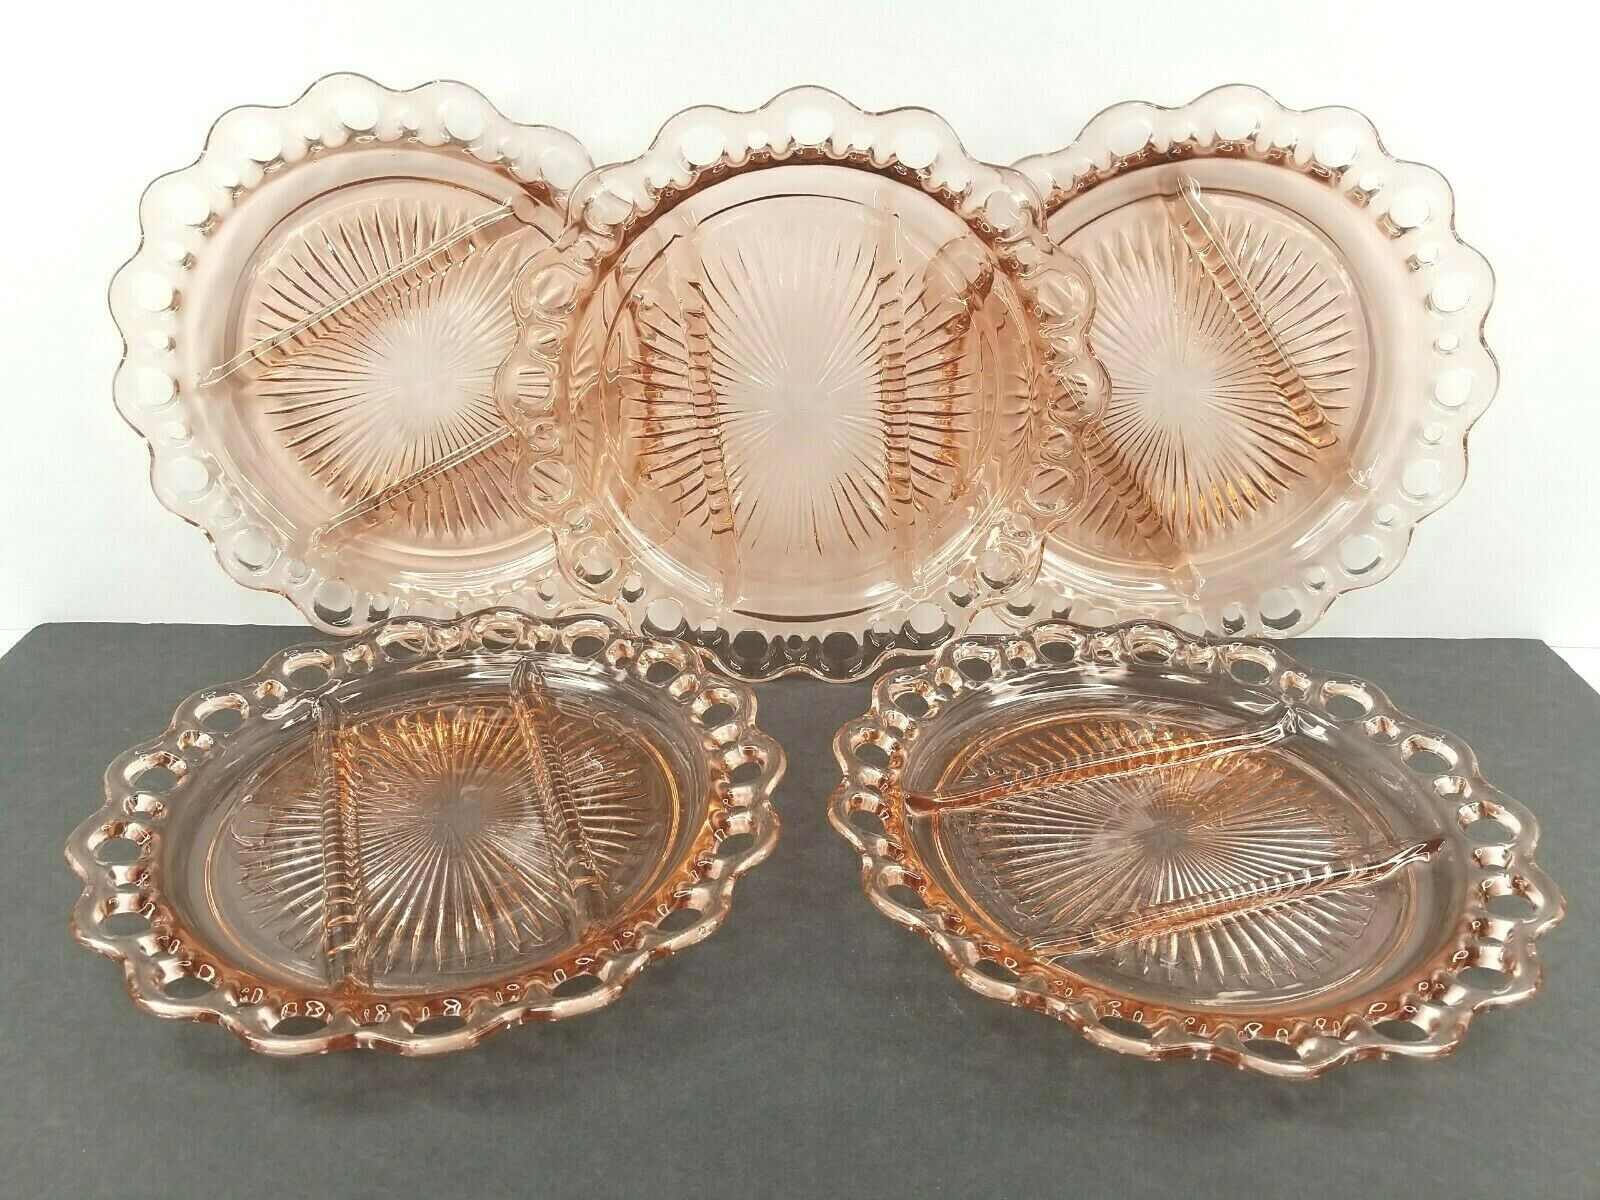 5 Anchor Hocking Old Colony Lace Edge Pink 3 Part Relish Set Vintage Glass Dish